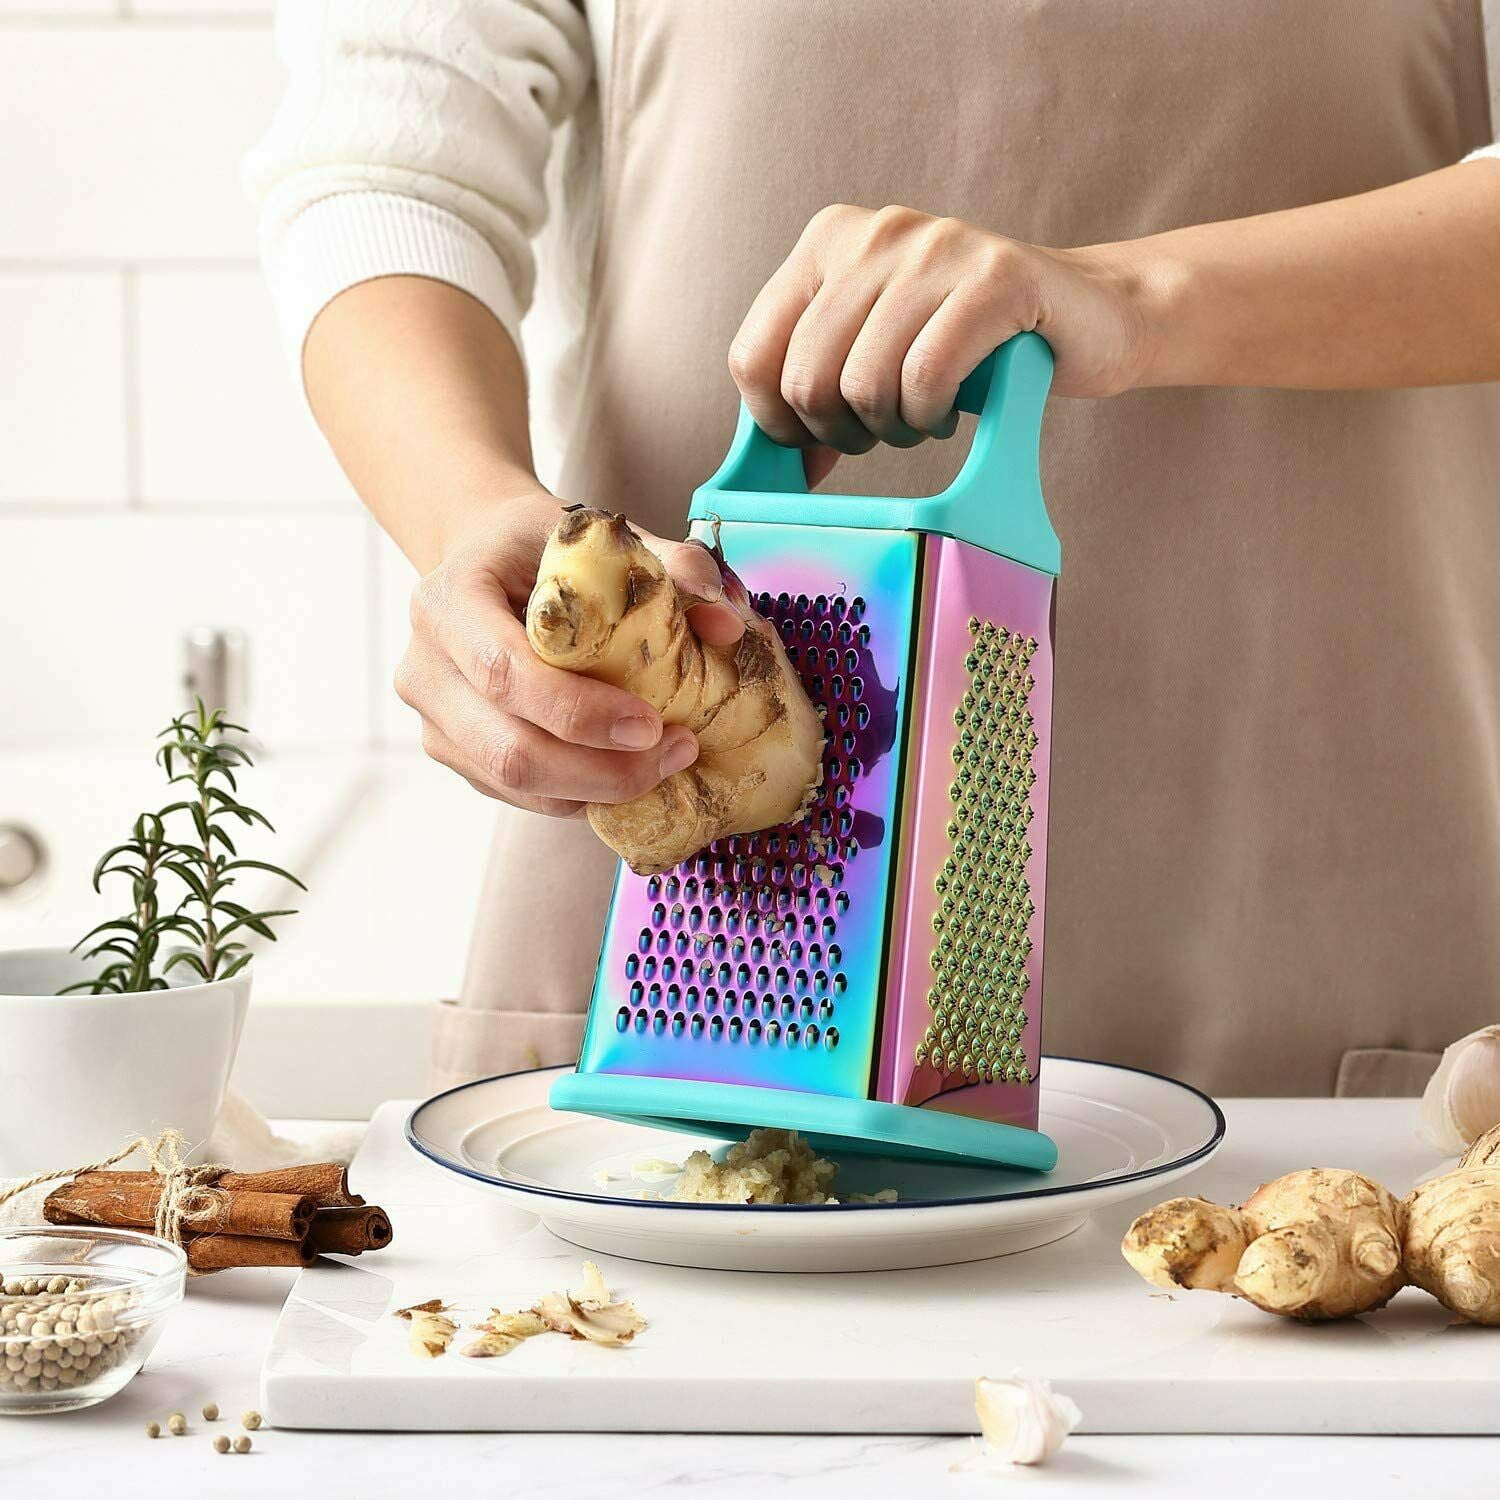 Marco Almond KYA53 Golden Cheese Grater, 4-Sided Stainless Steel Box  Grater, Food Shredder with Handle Best for Cheese, Cucumber Potato Salad